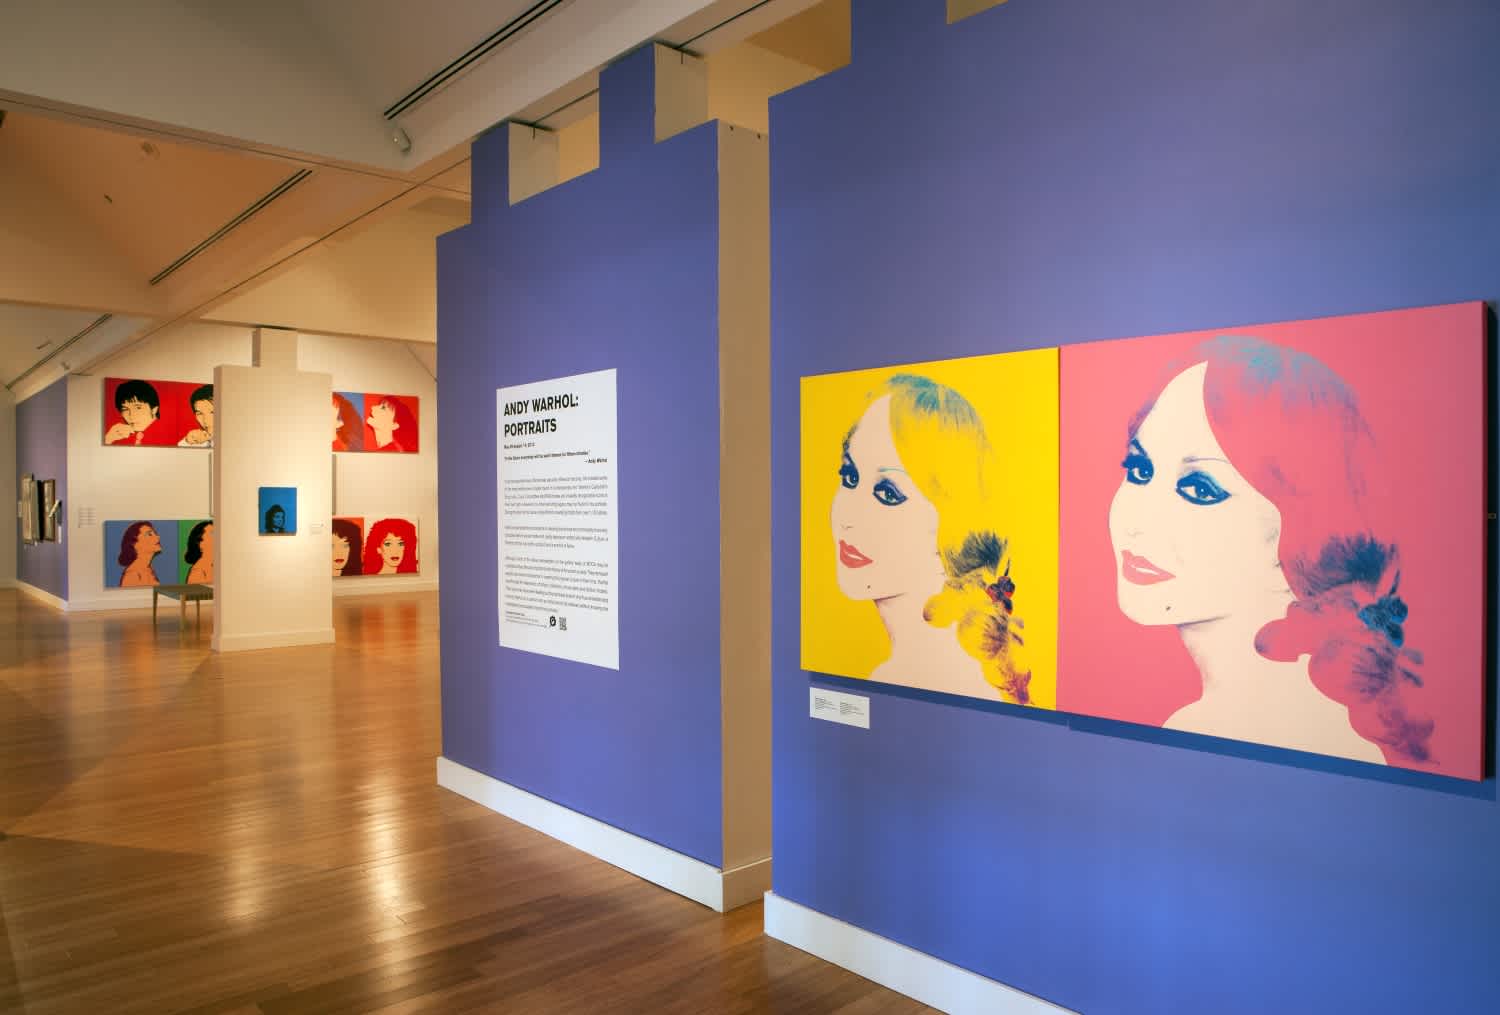 Installation image of the art exhibition Andy Warhol: Portraits at the Virginia Museum of Contemporary Art